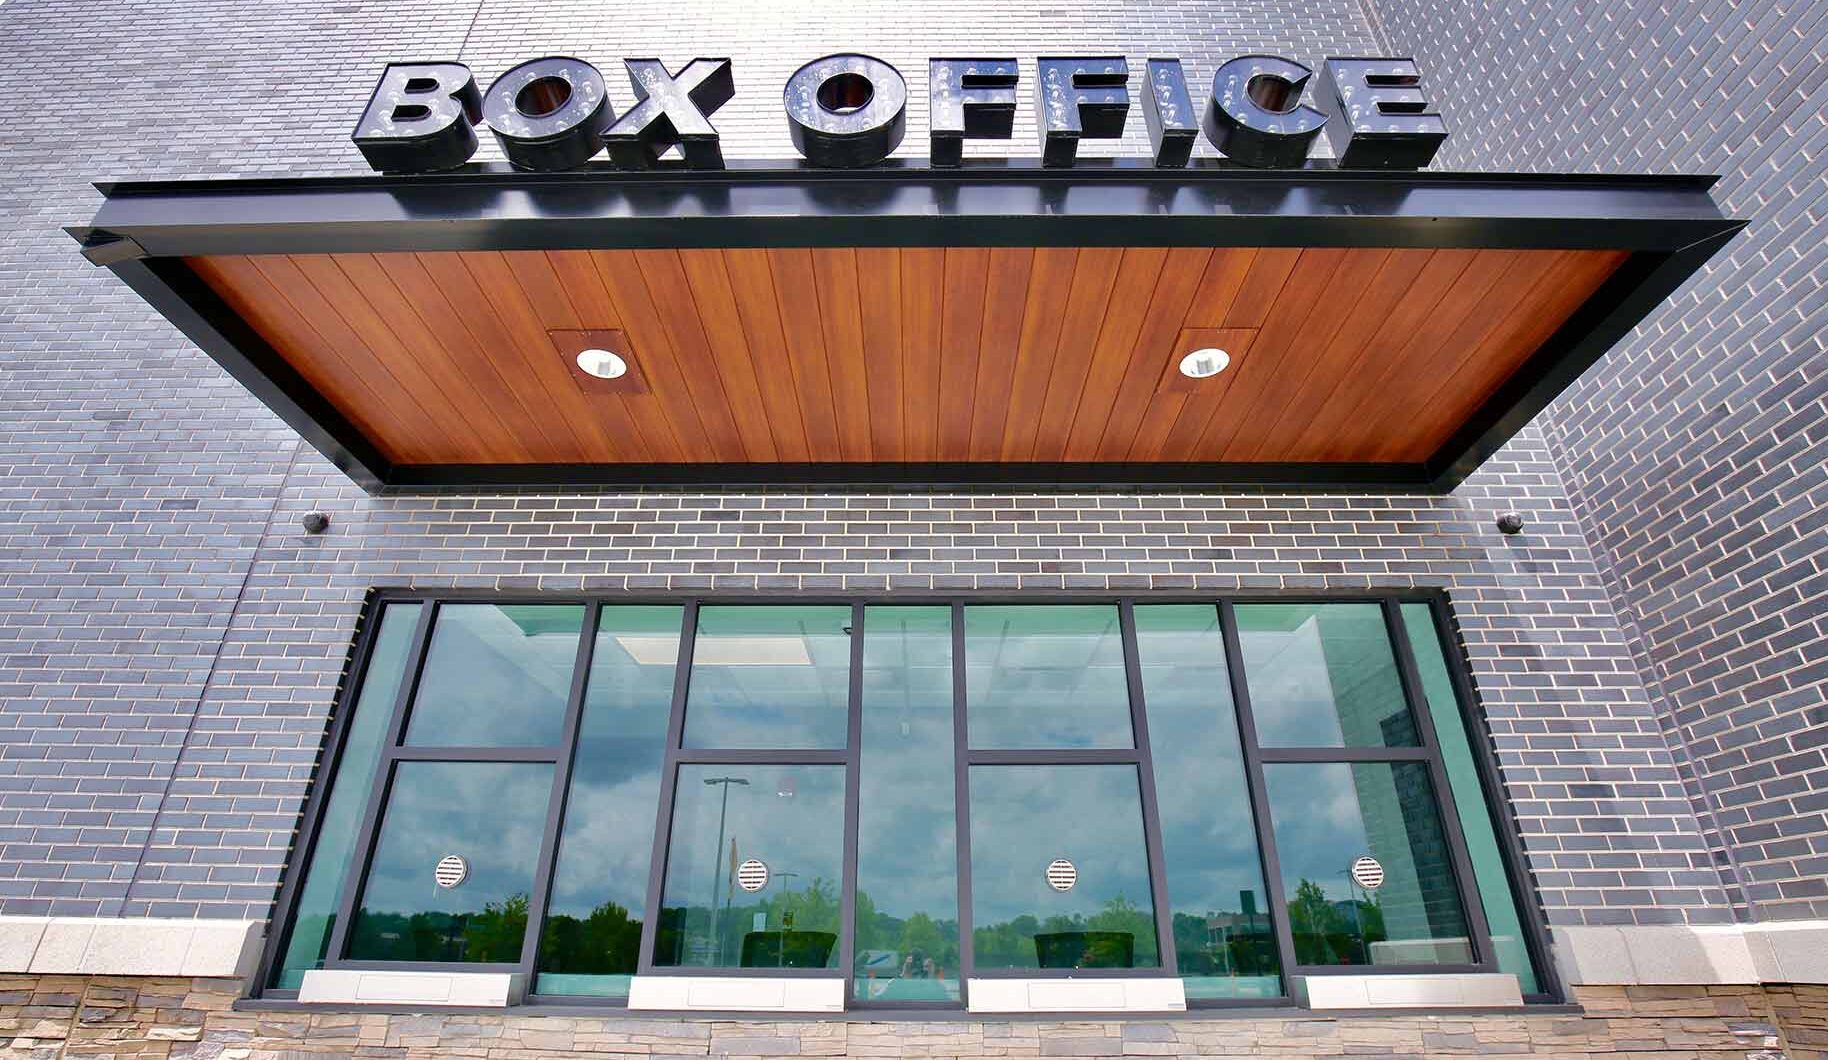 The Factory Box Office